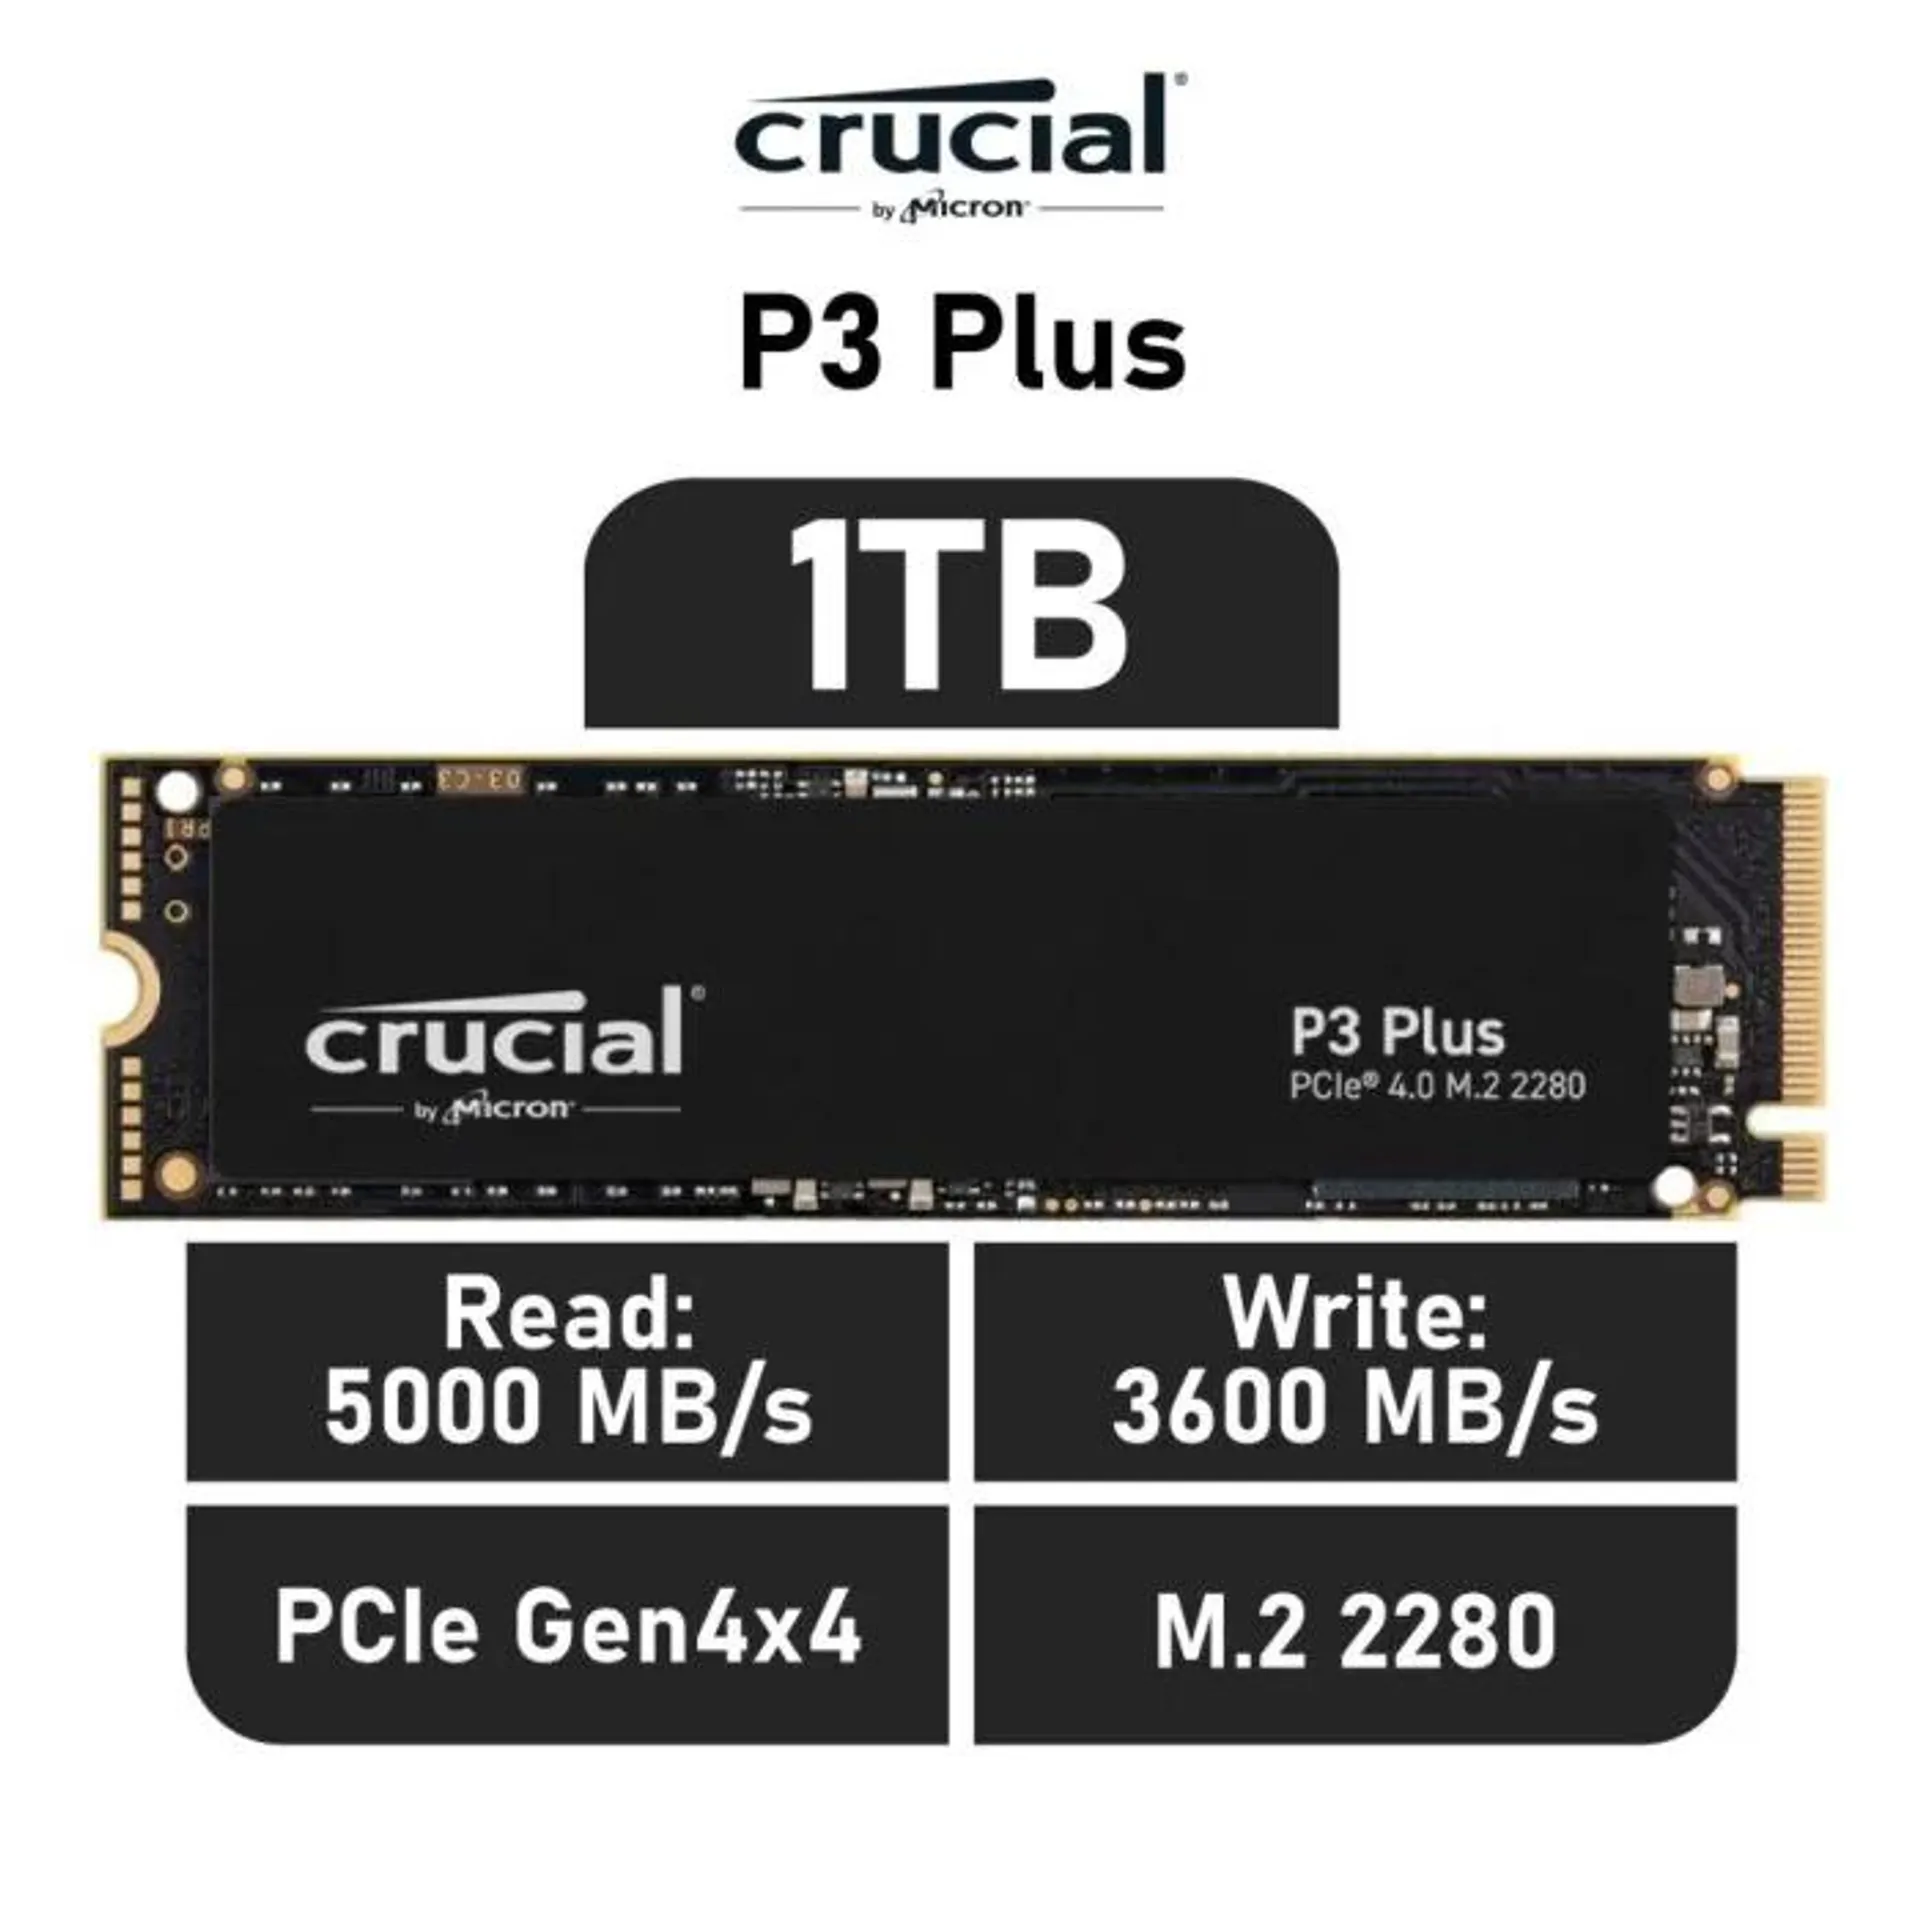 Crucial P3 Plus 1TB PCIe Gen4x4 CT1000P3PSSD8 M.2 2280 Solid State Drive